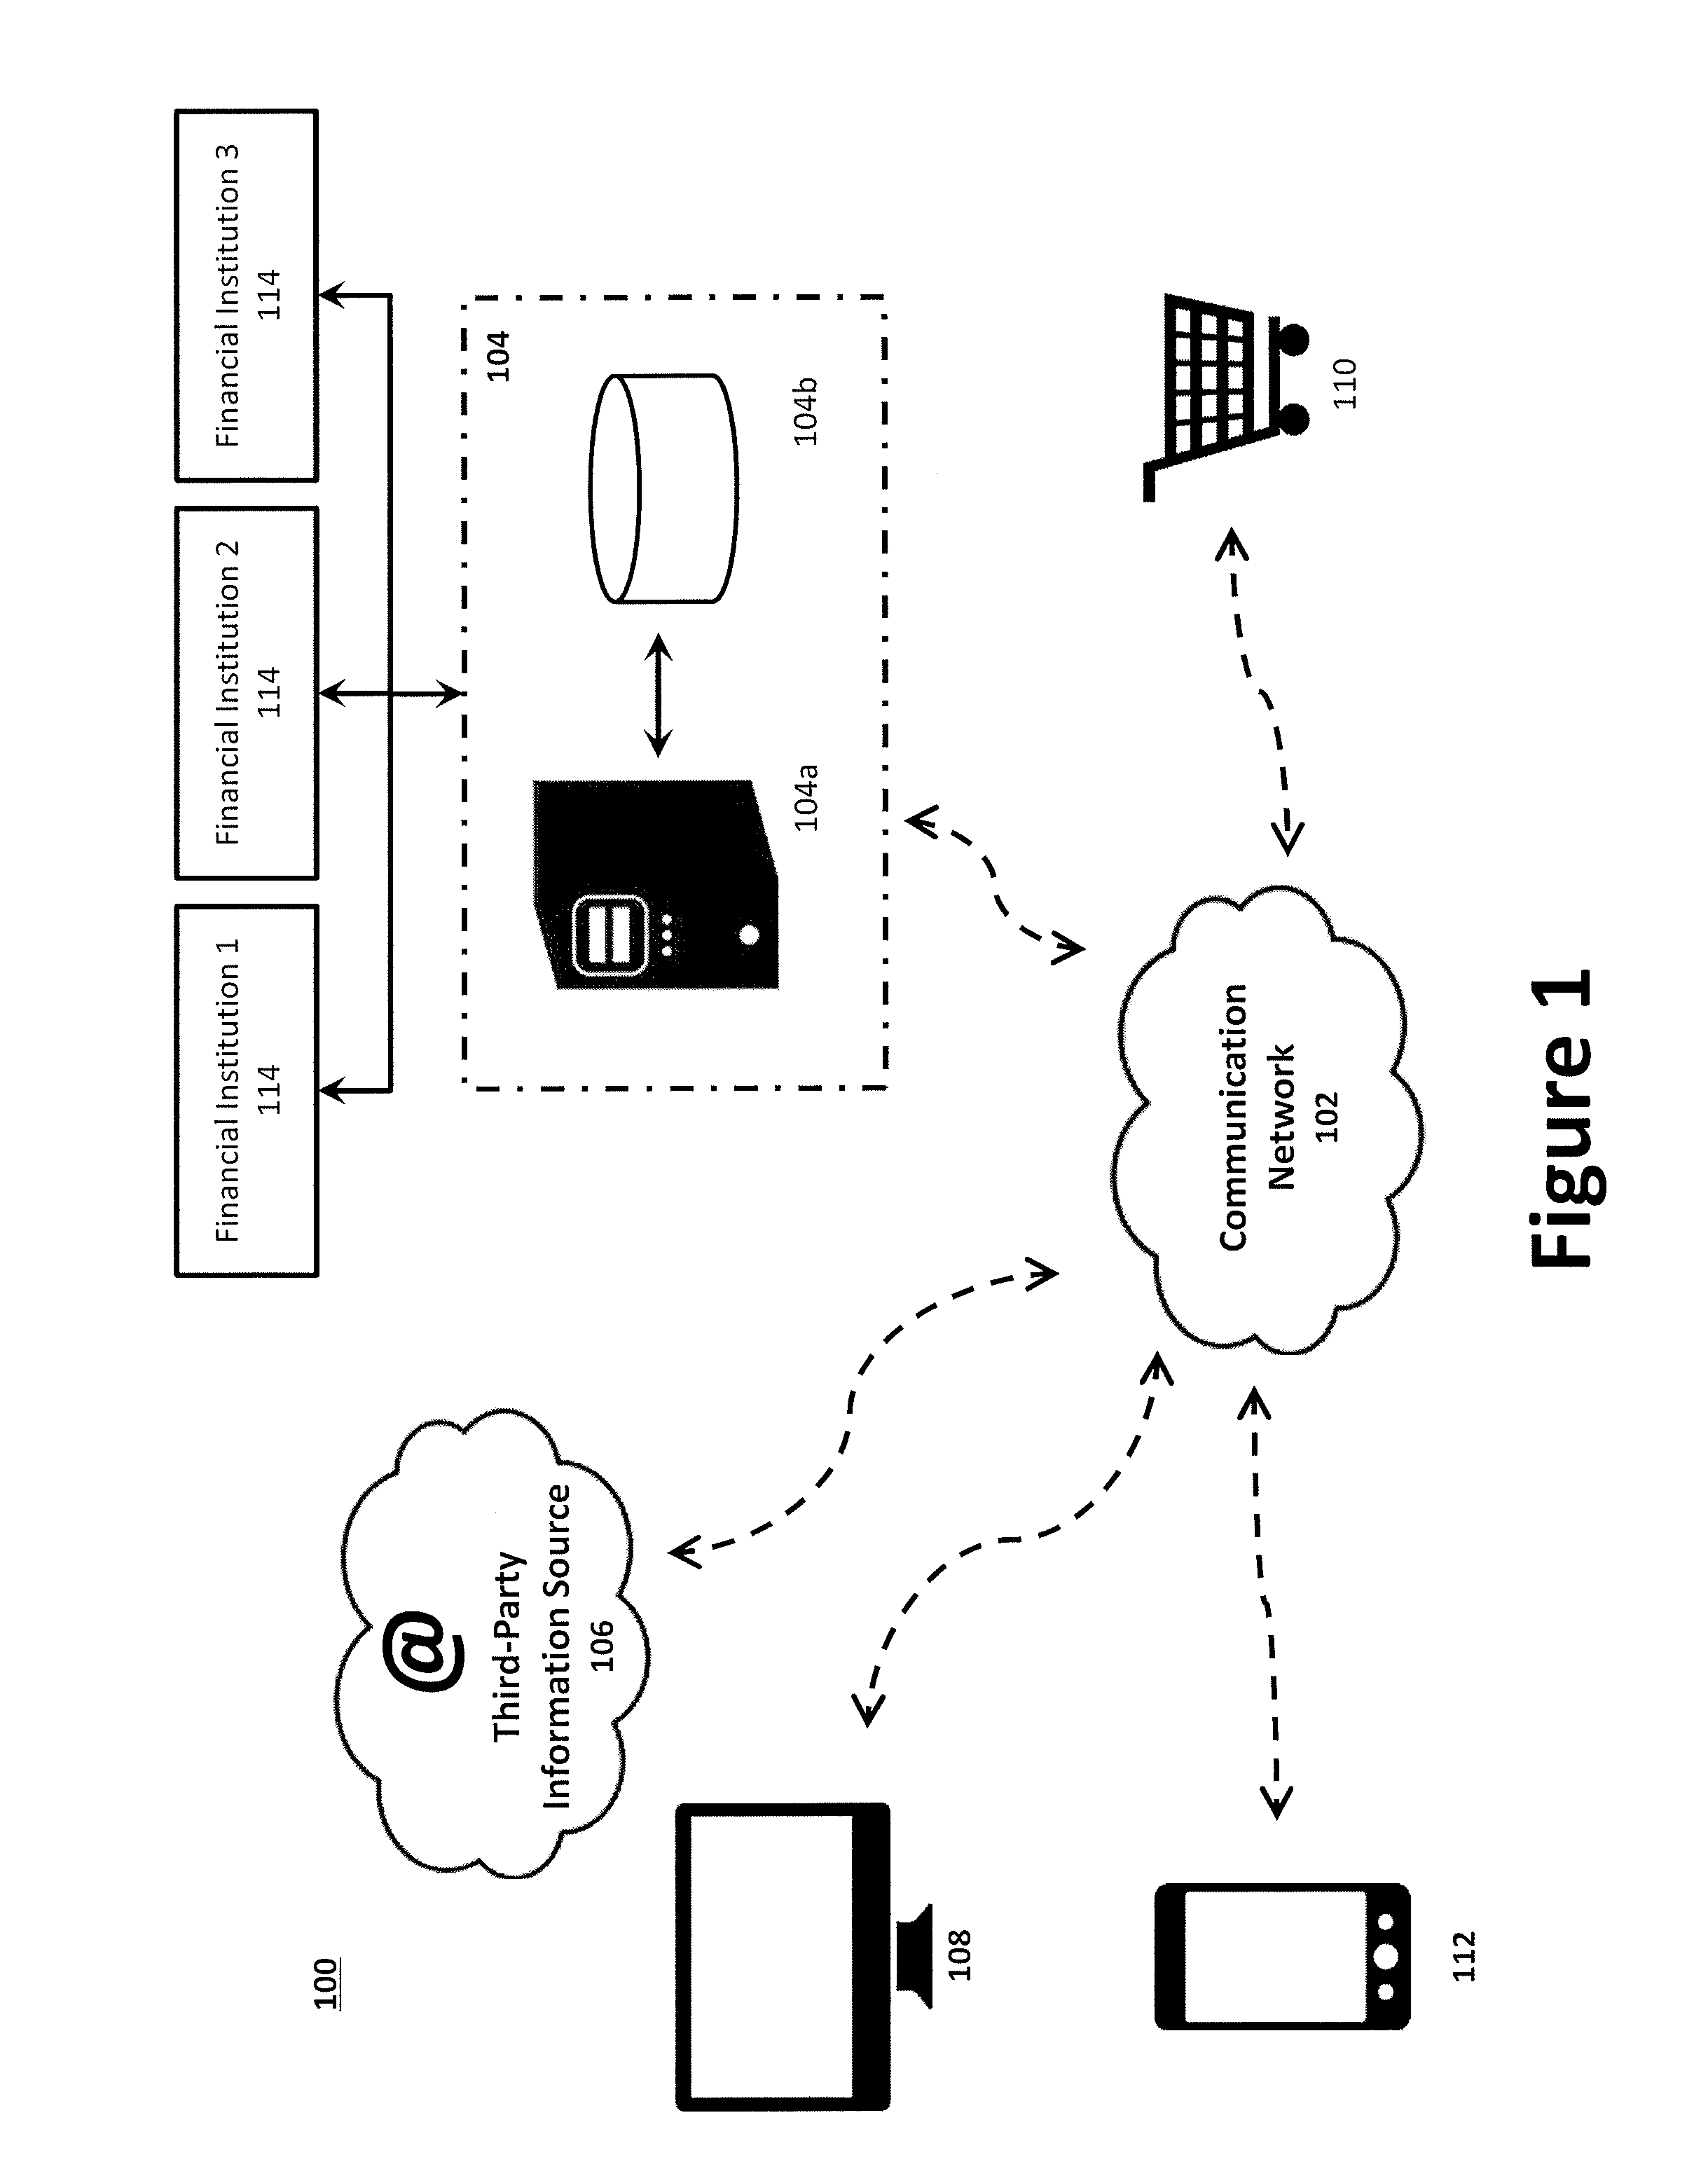 System and Method for Enhanced Transaction Authorization